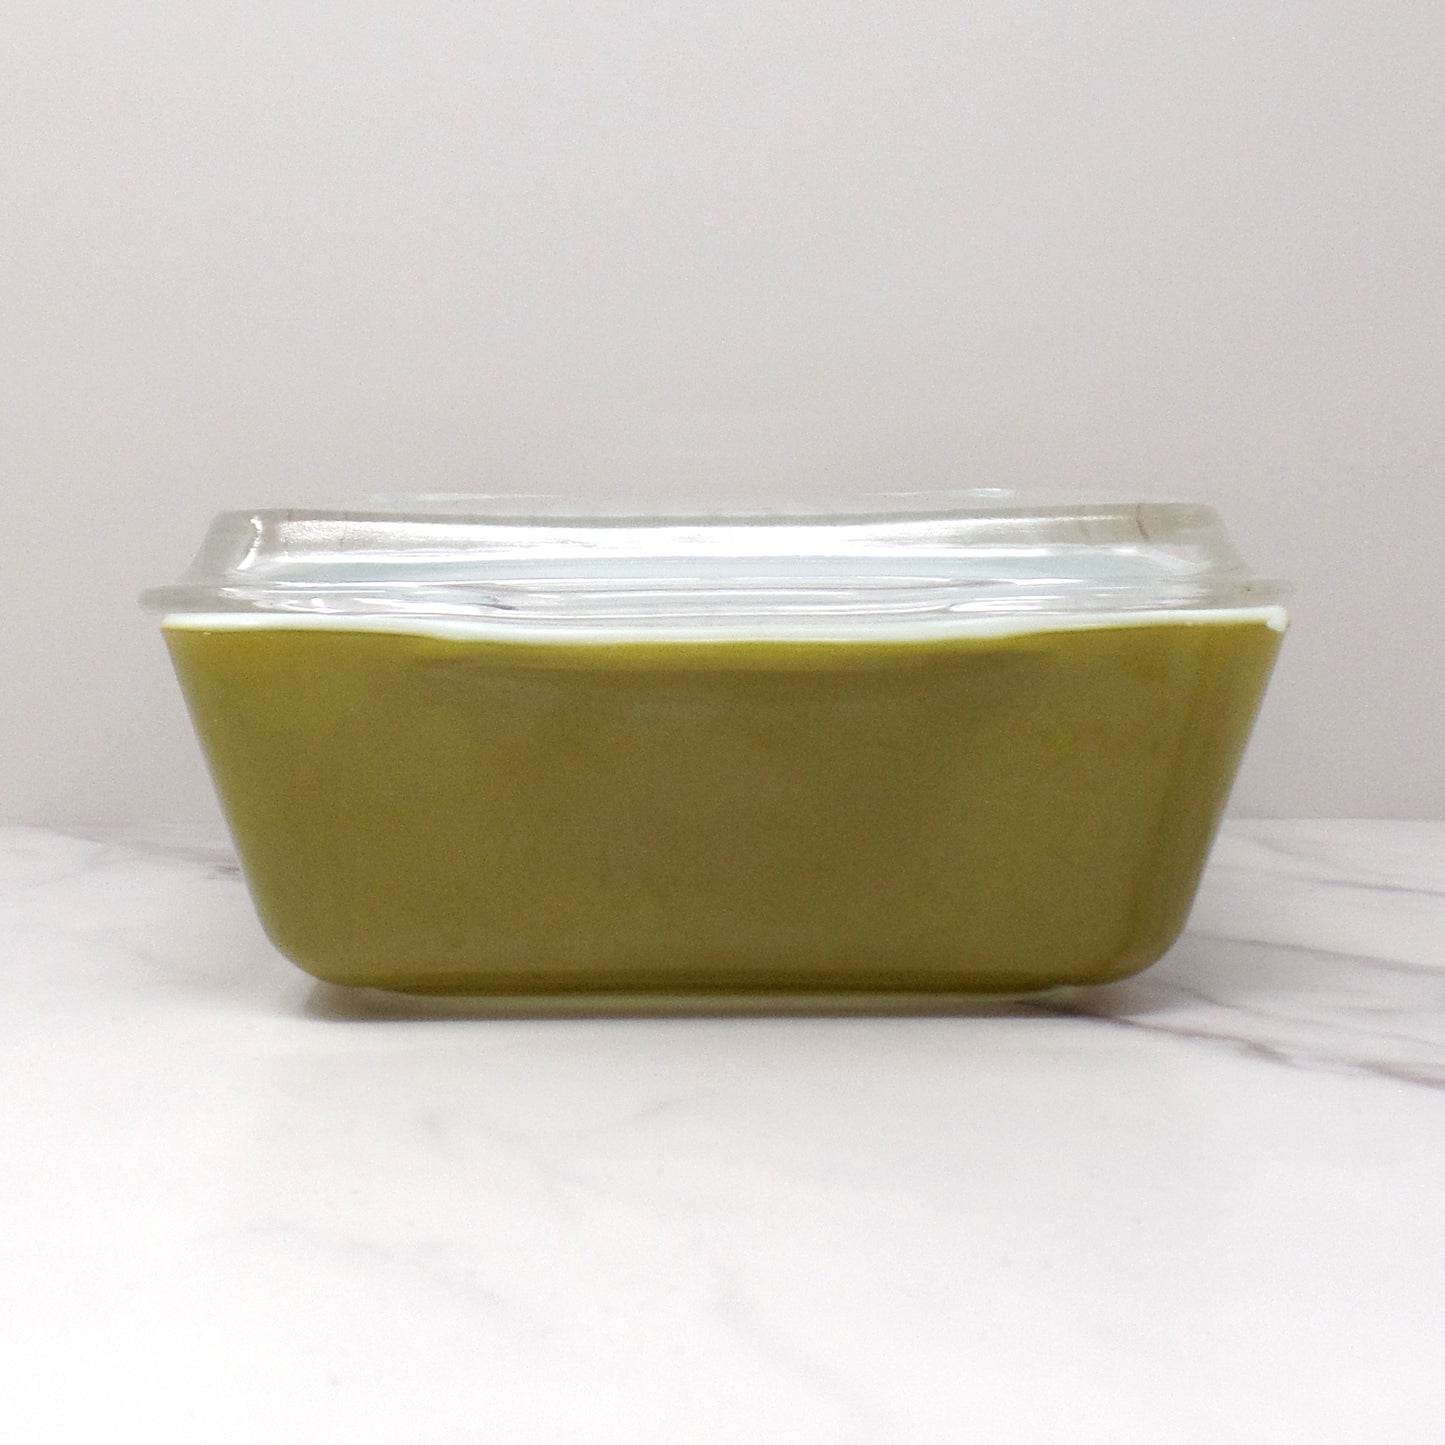 Vintage Pyrex Refrigerator Dish (1.5 Qt / model 503) with Glass Lid - Spring Blossom Green / Crazy Daisy